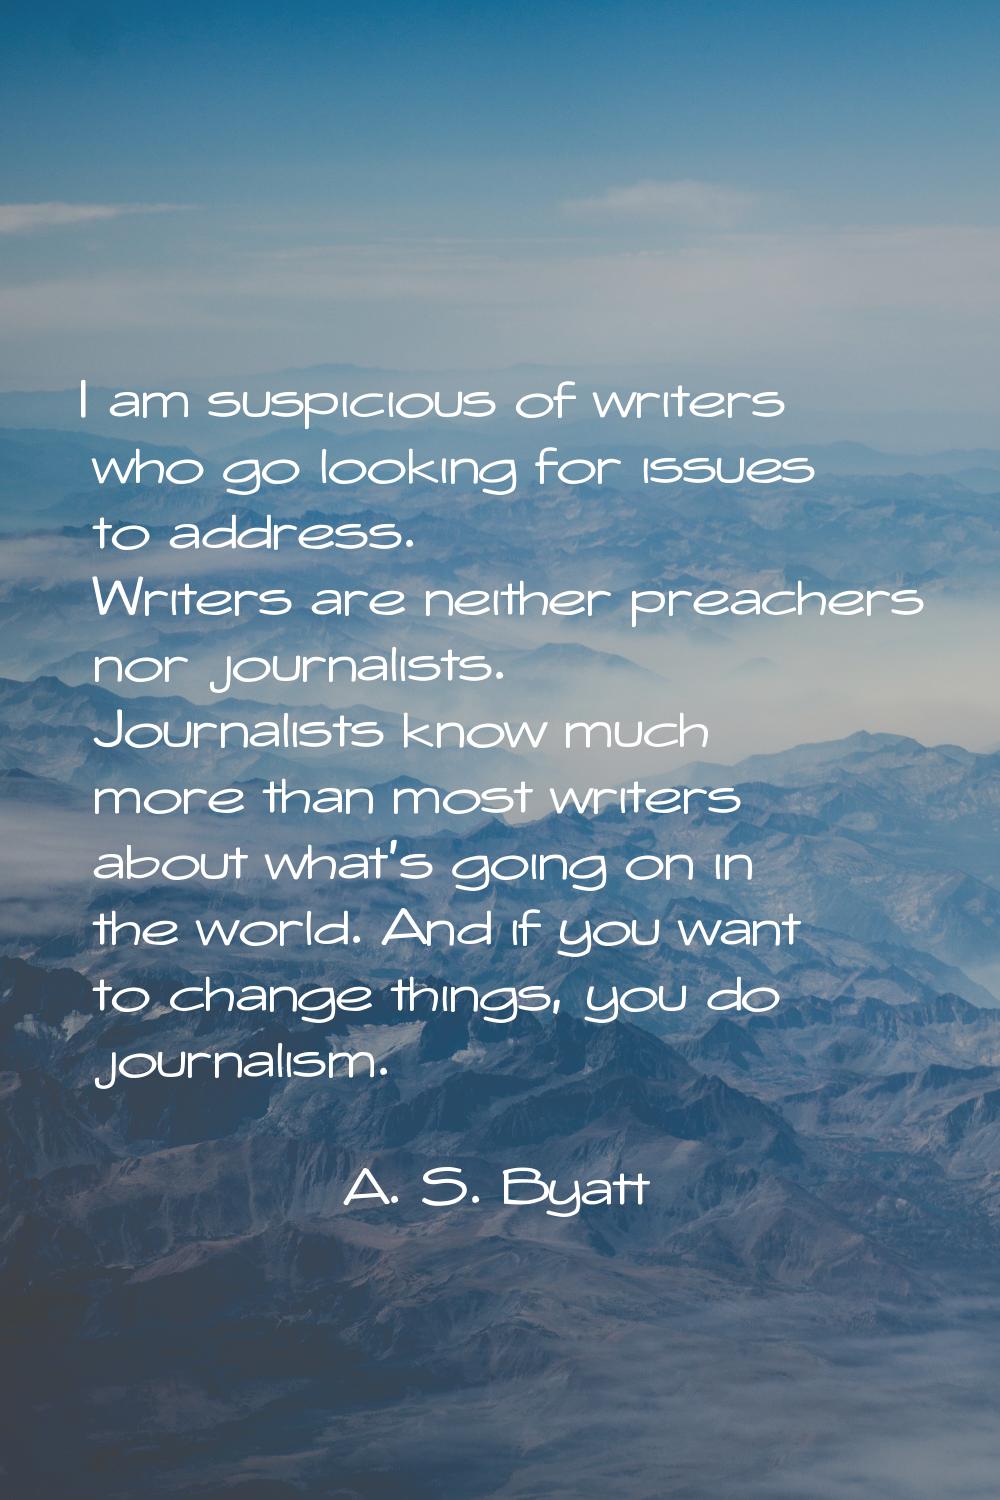 I am suspicious of writers who go looking for issues to address. Writers are neither preachers nor 